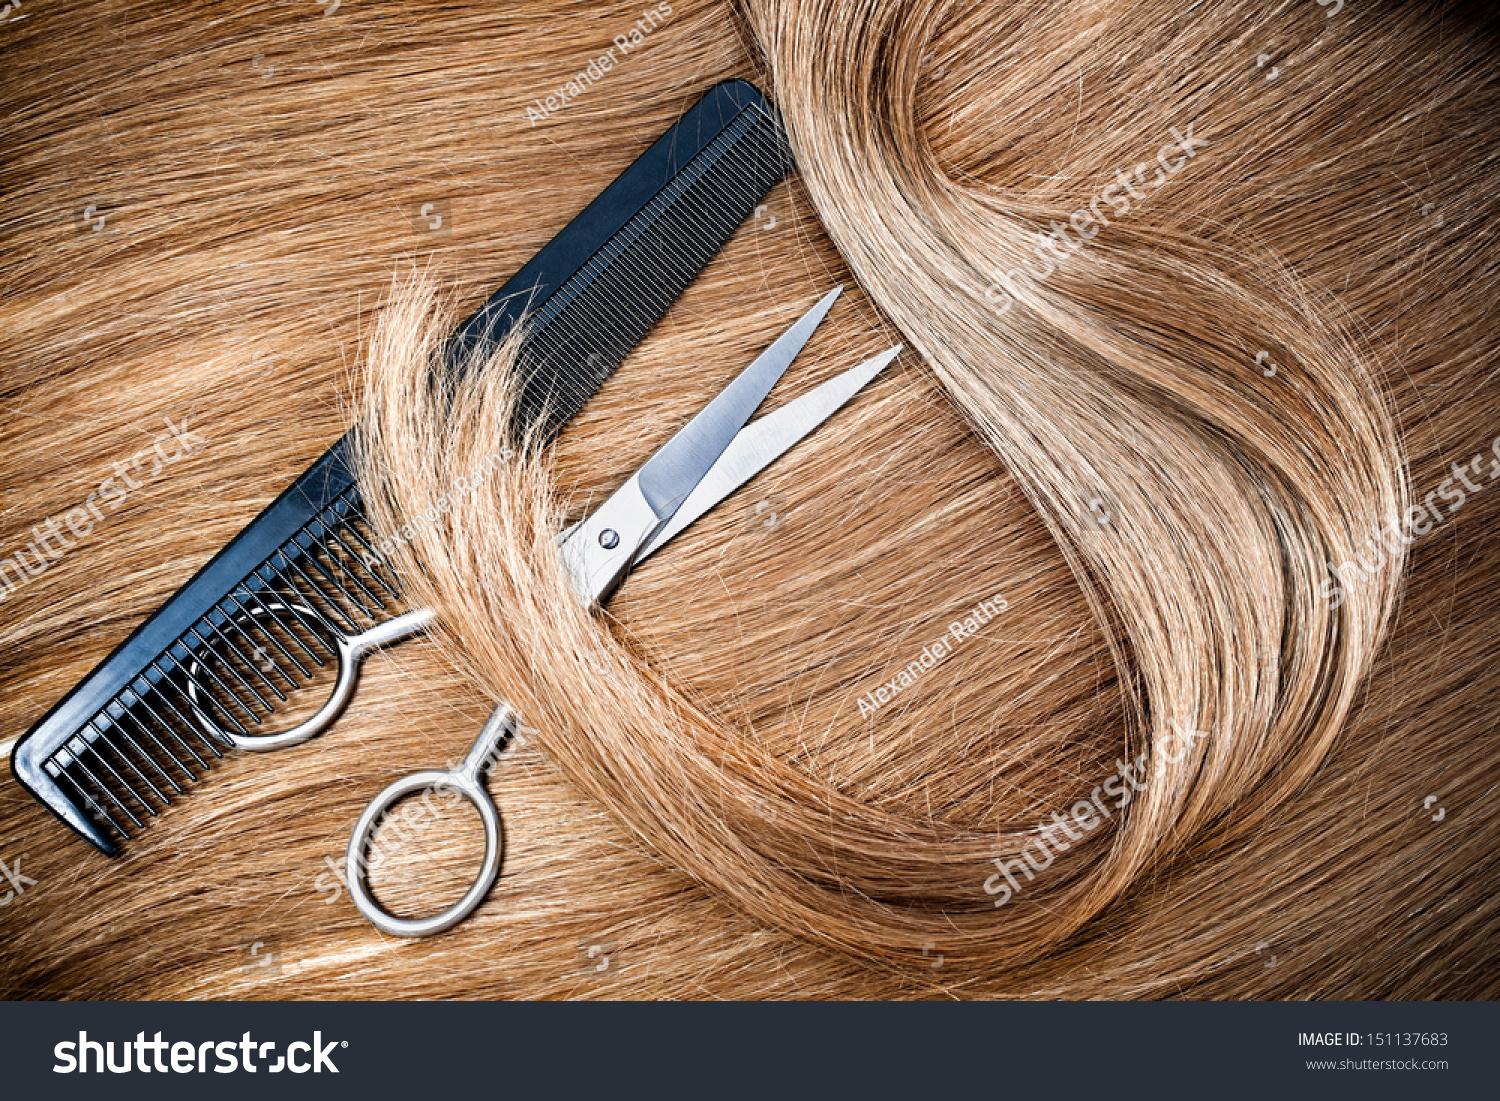 1500 x 1101 · jpeg - Professional Hairdresser Scissors And Comb On Hair Background Stock ...